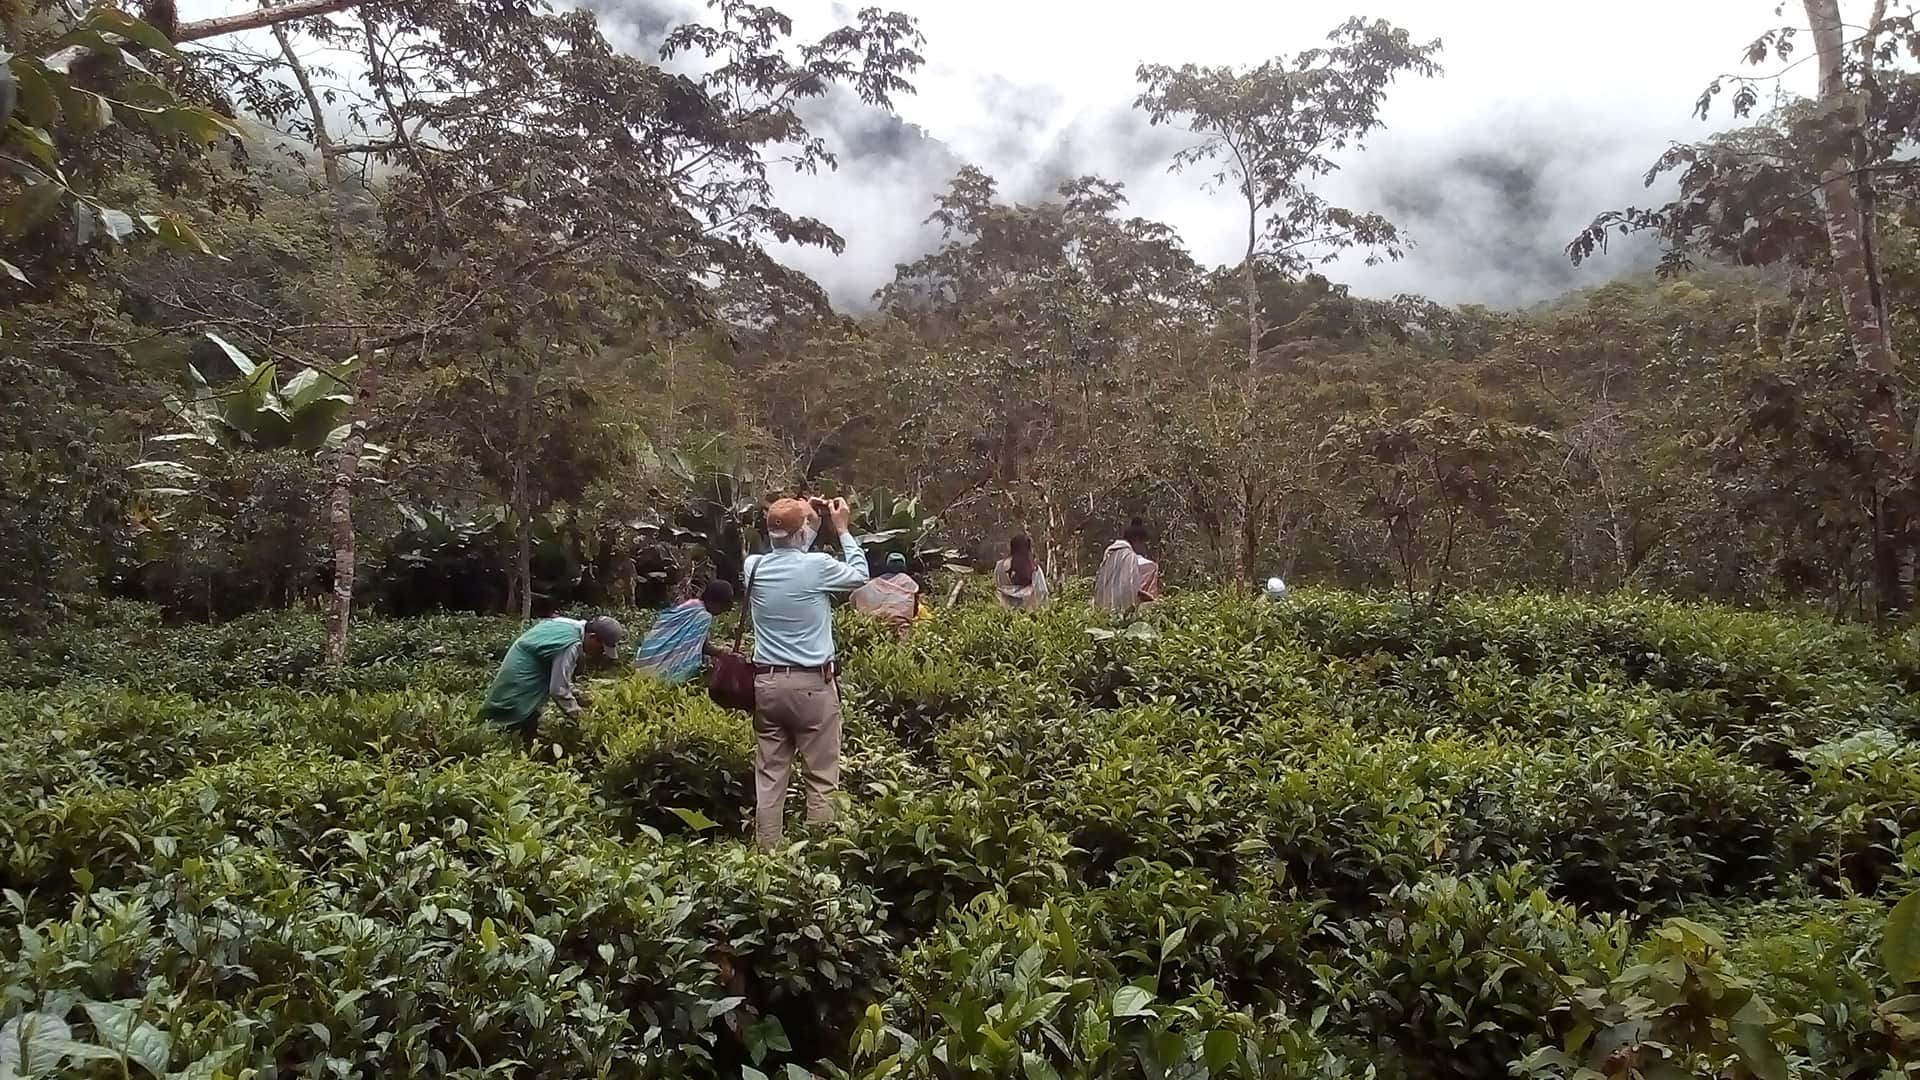 Visitor photographing the tea harvest activity